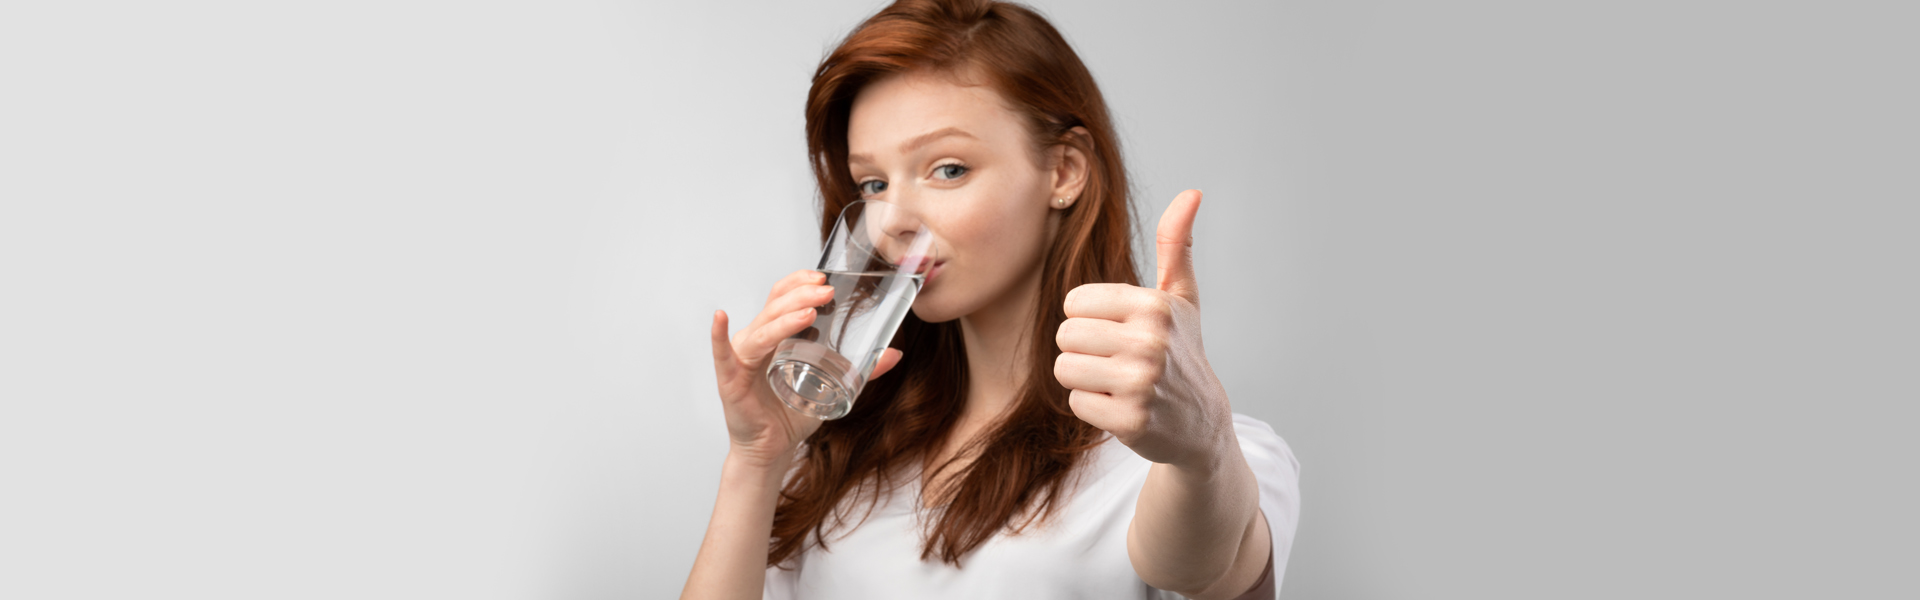 When and What Can You Eat After Fluoride Treatment?